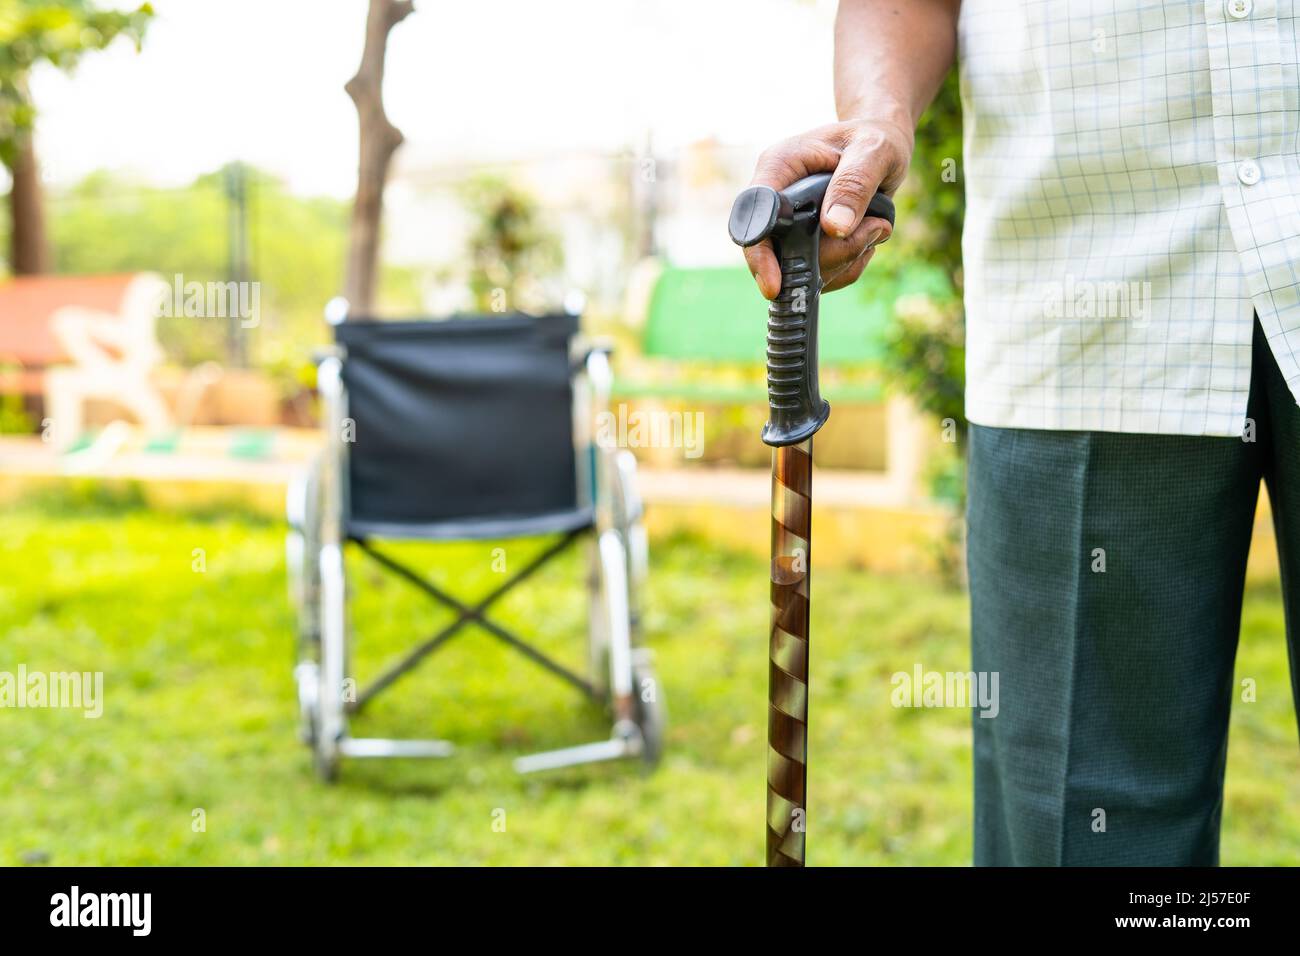 Old man waliking by using stick in front of wheelchair at hospital garden - concept of healthcare, recovery, treatment. Stock Photo